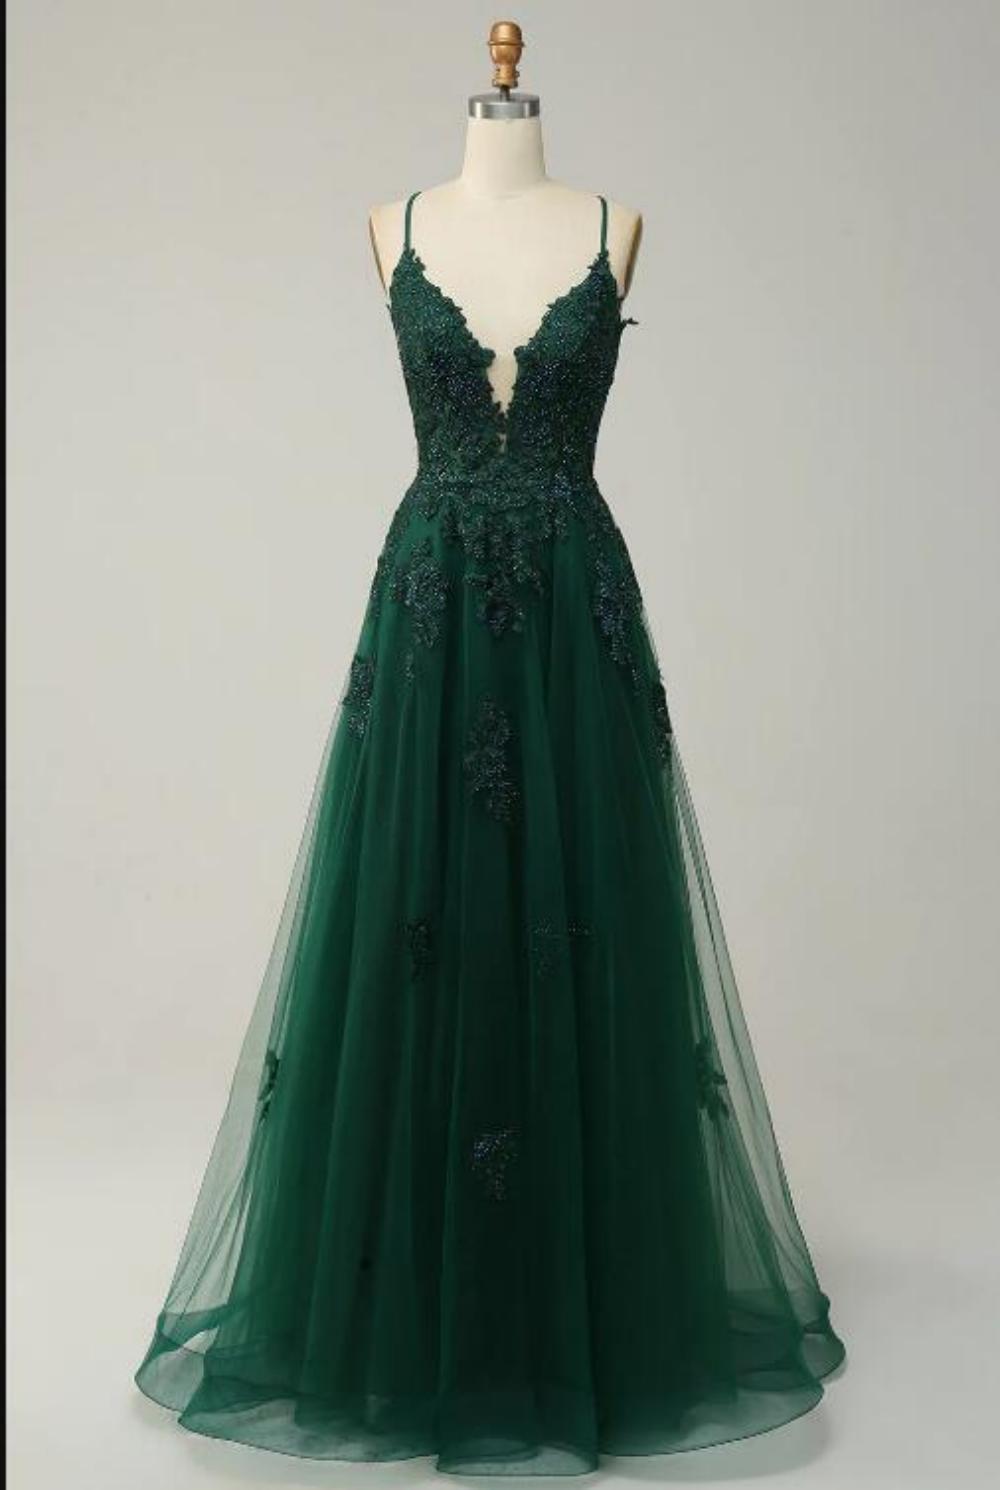 A Line Spaghetti Straps Dark Green Long Prom Dress With Criss Cross Back